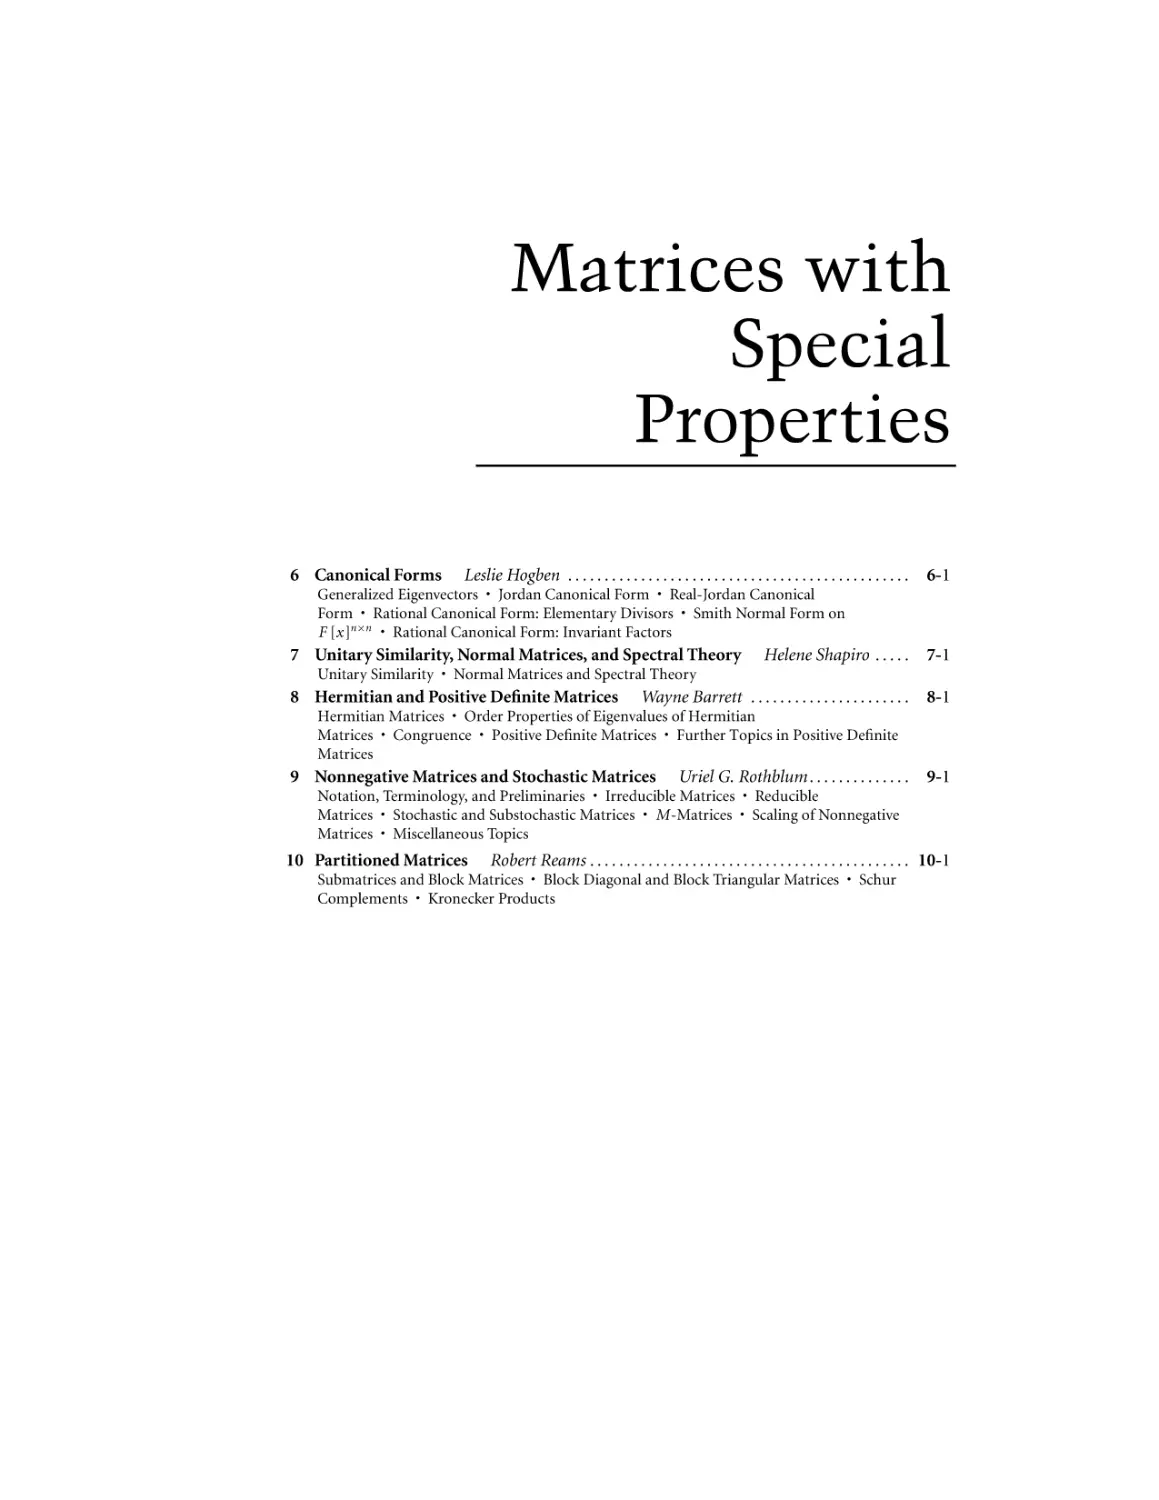 Matrices with Special Properties